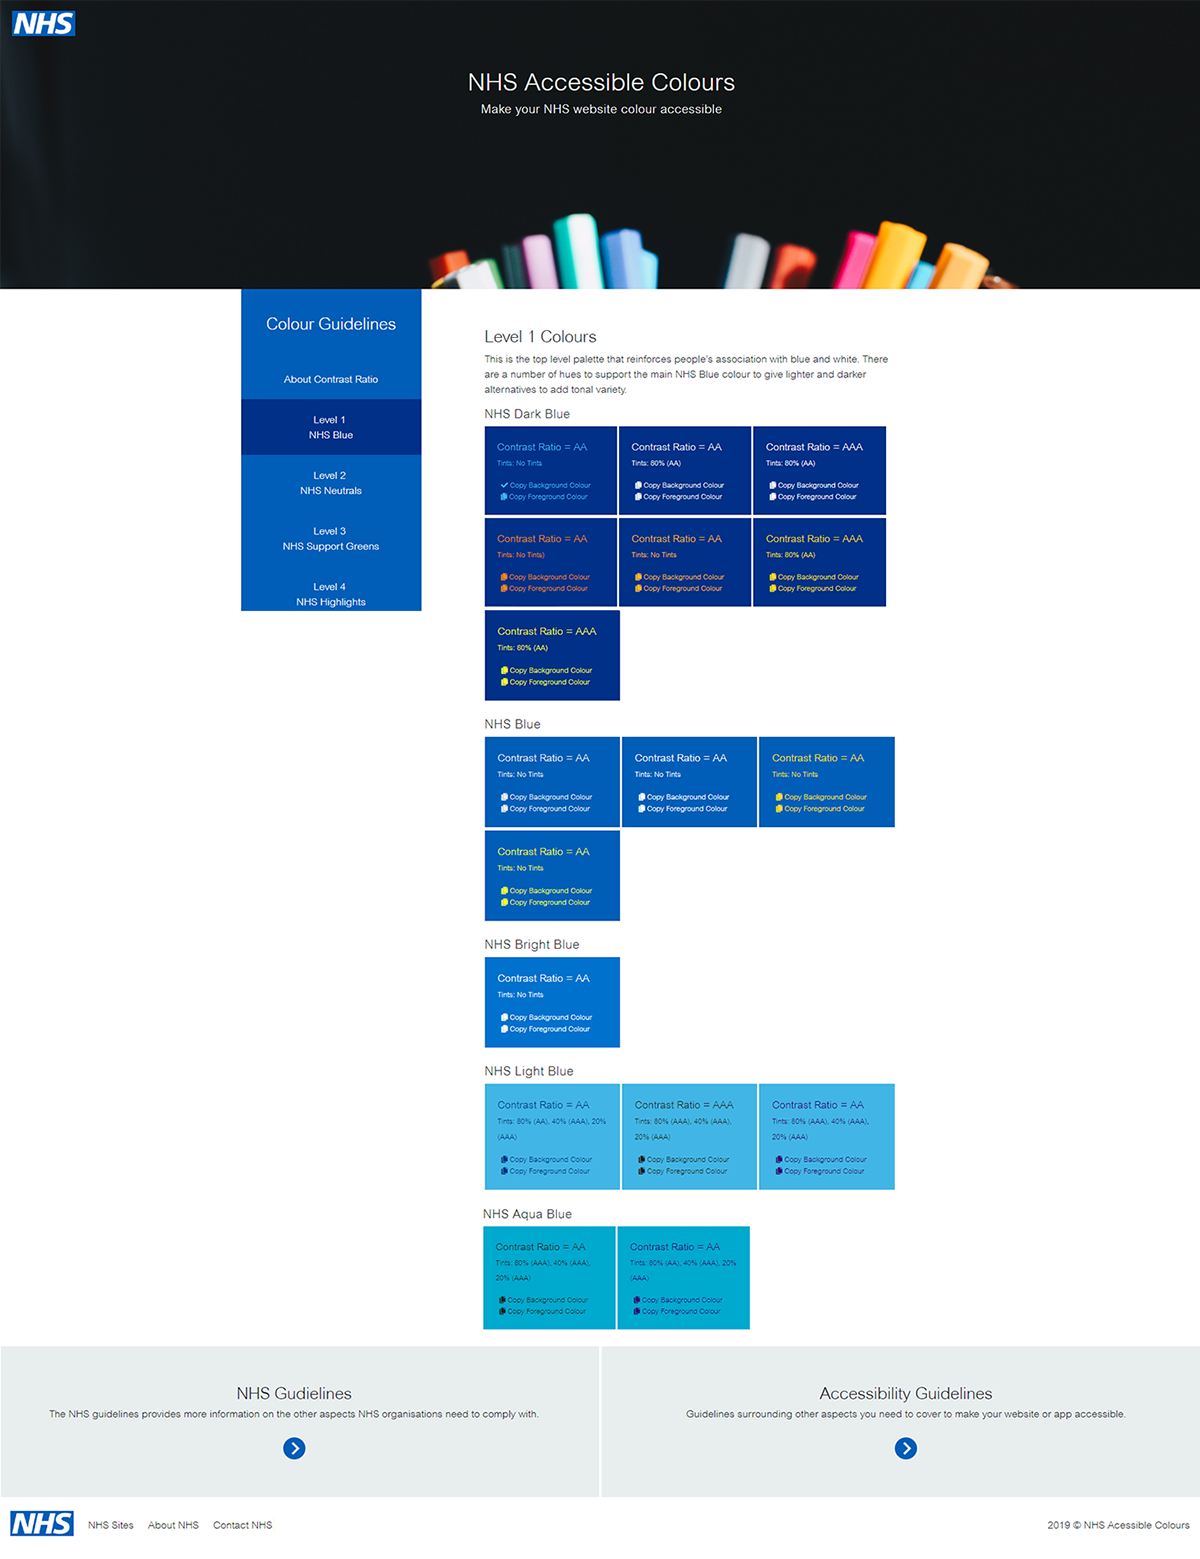 Screenshot of the NHS Accessible Colours site design